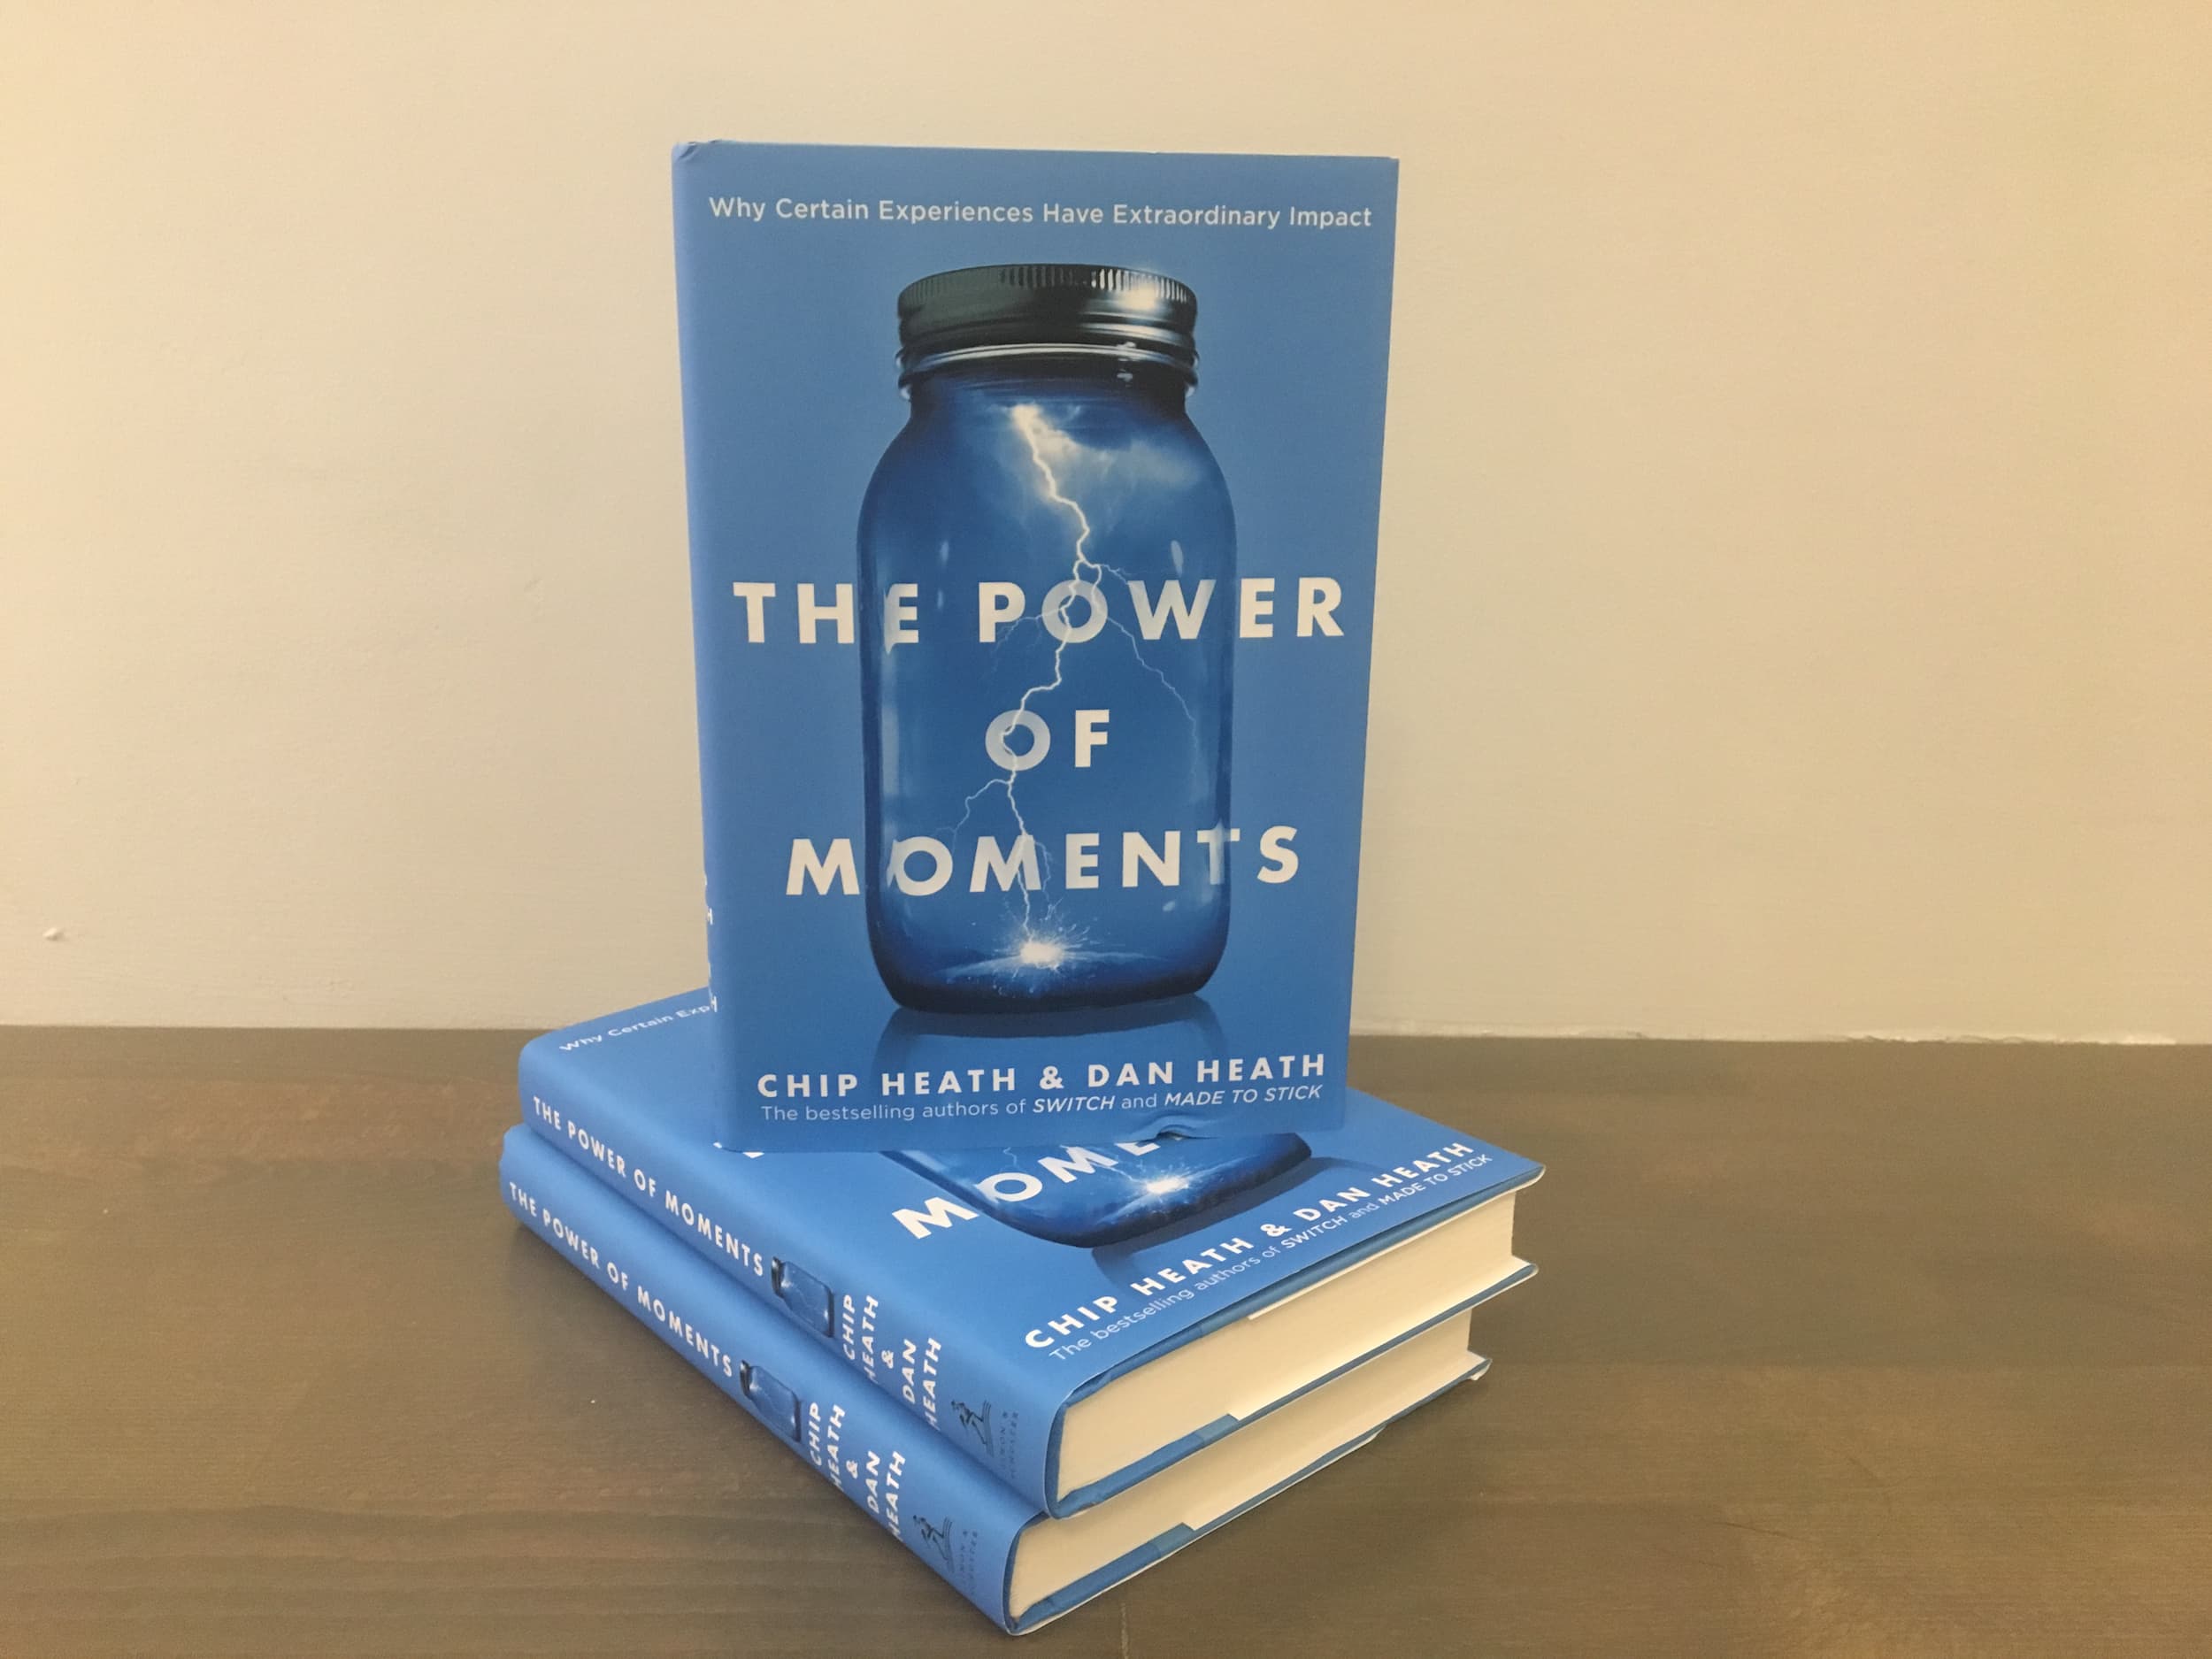 Book cover of Power of Moments by Chip and Dan Heath